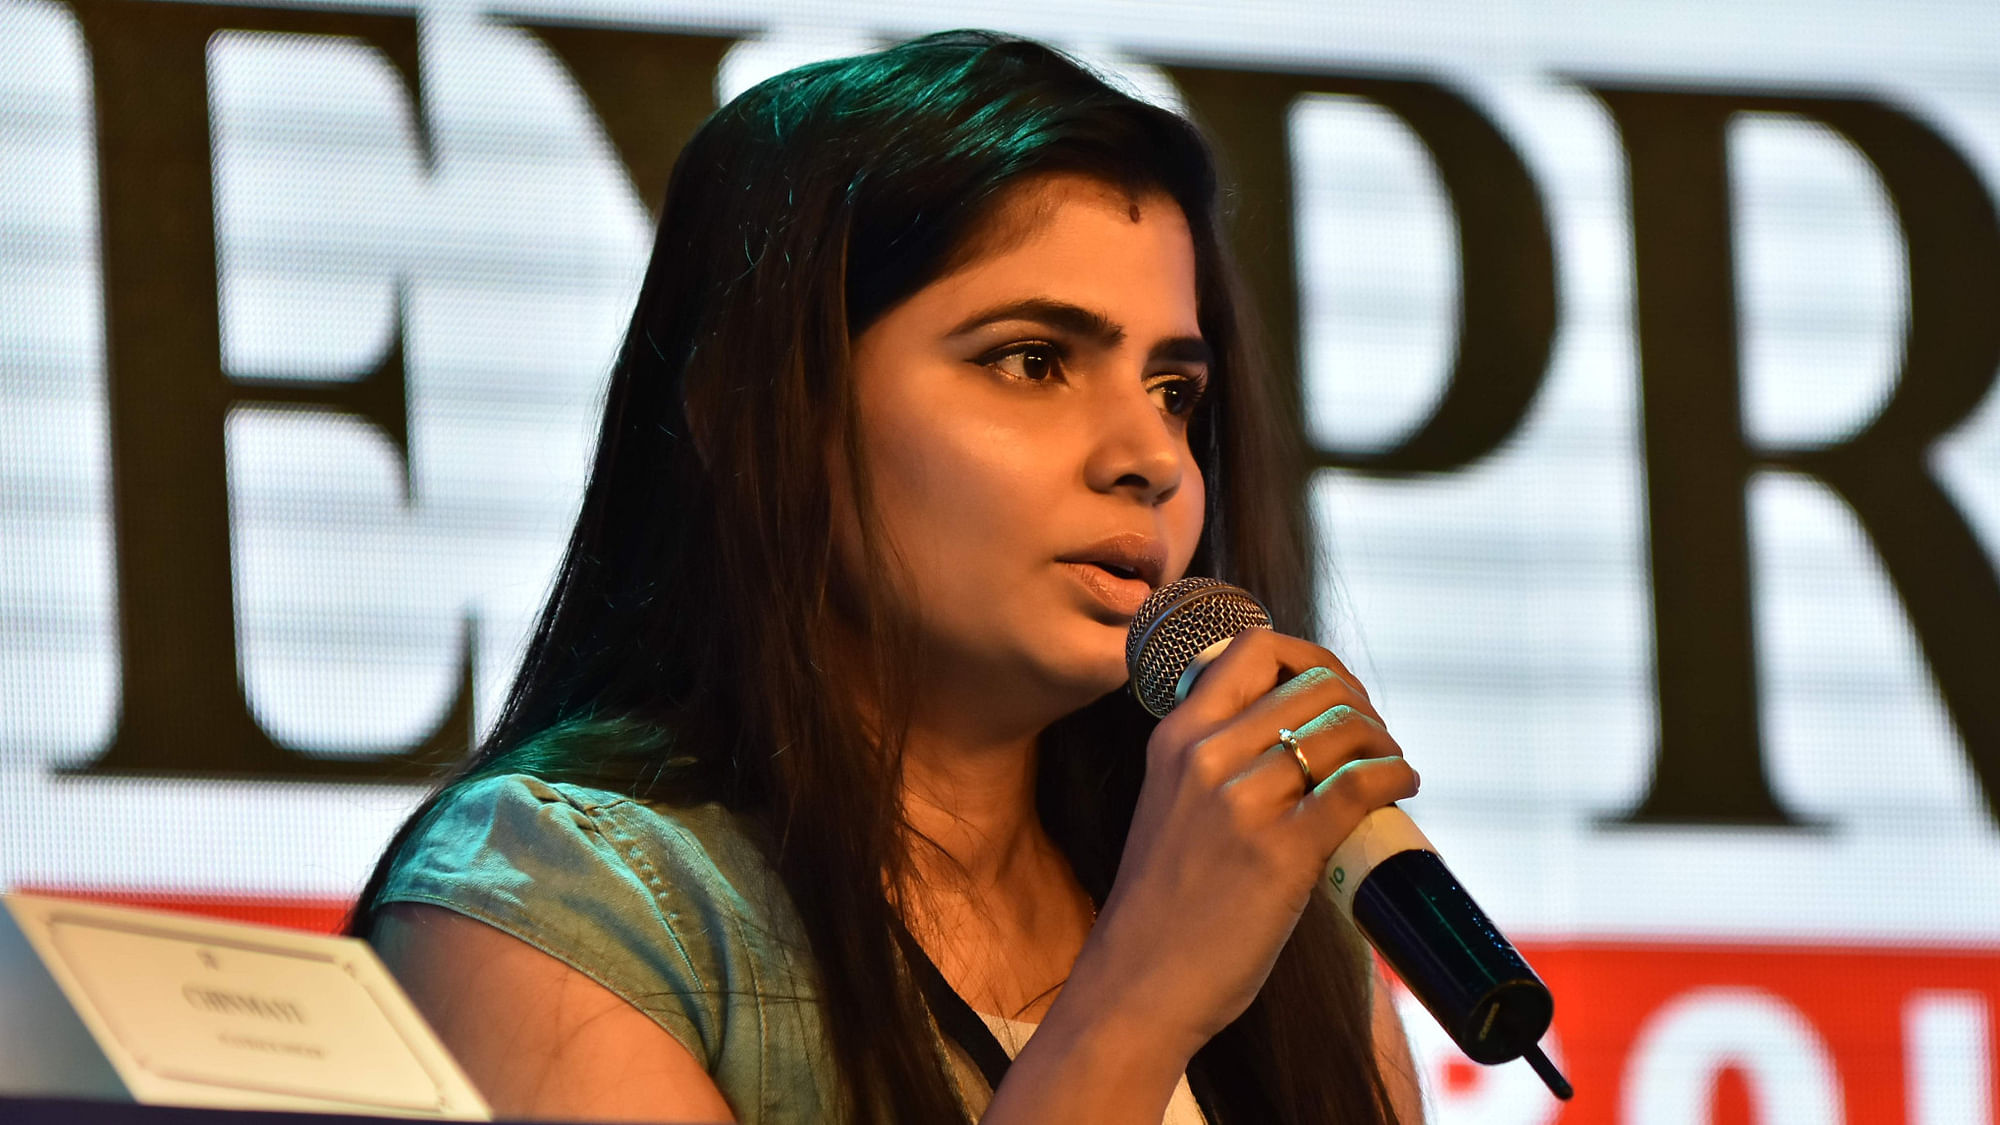 Earlier this year, Chinmayi made allegations of sexual misconduct against lyricist Vairamuthu &amp; supported women who spoke up against Radha Ravi who heads the Dubbing Artistes Union.